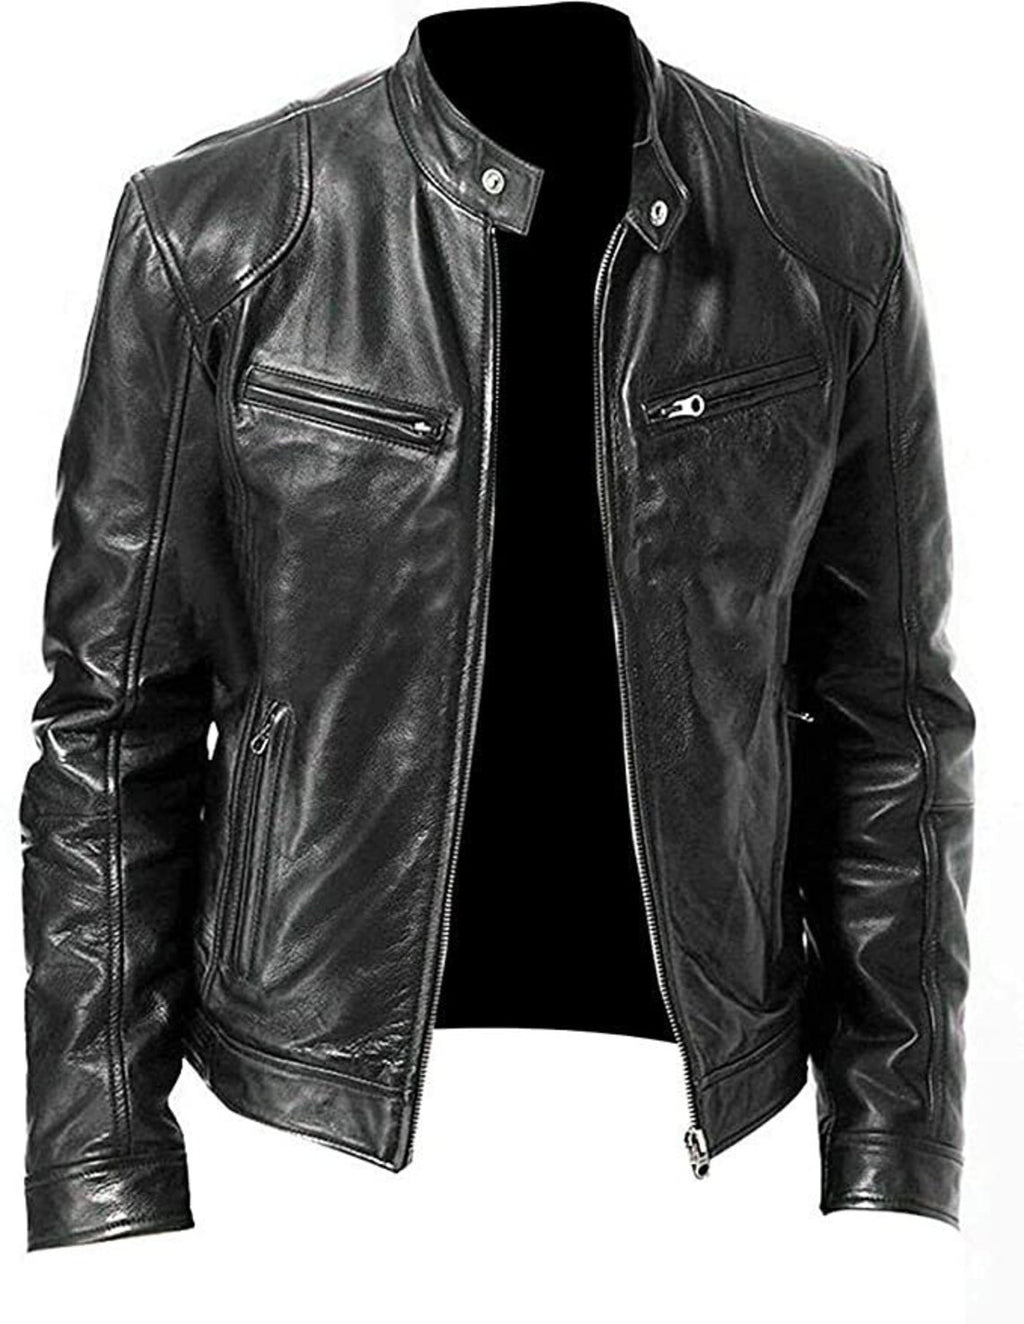 WOSJKDJ Mens Leather Trench Coat 3/4 Length Faux Leather Jacket Classic  Belted Zipper Windproof Hood Duster Overcoat Outwears at Amazon Men's  Clothing store